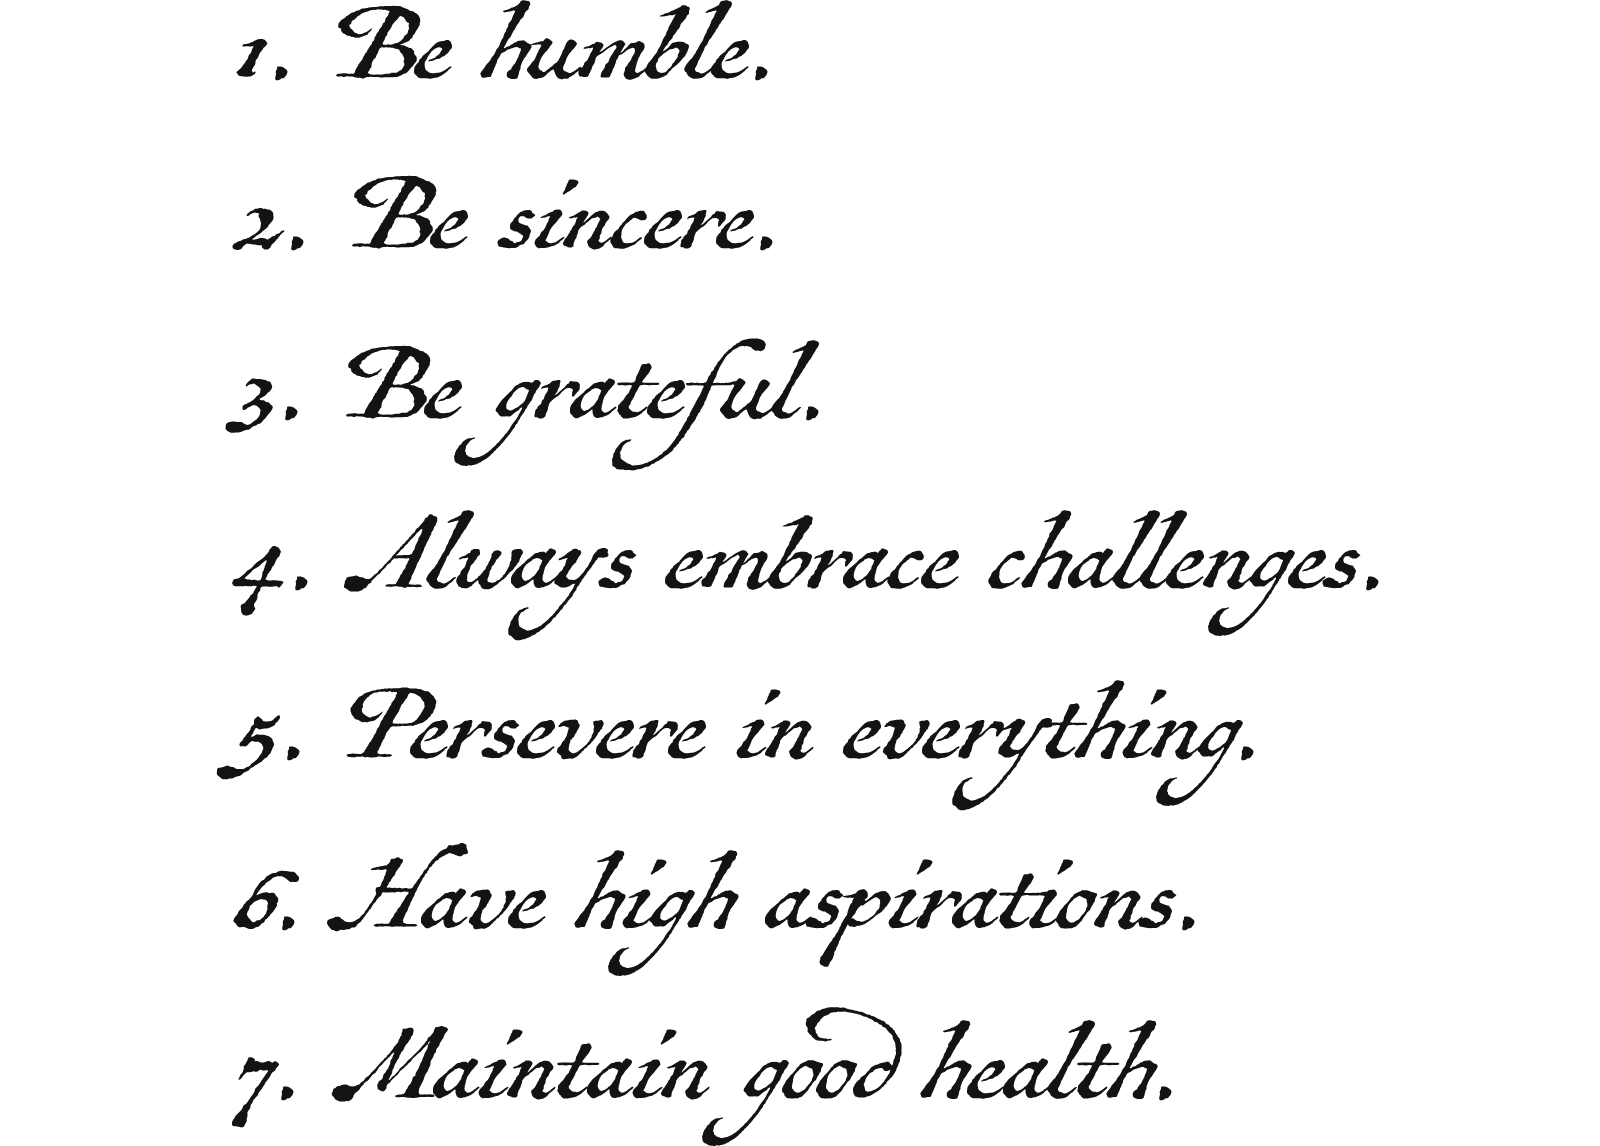 1. Be humble. 2. Be sincere. 3. Be grateful. 4. Always embrace challenges. 5. Persevere in everything. 6. Have high aspirations. 7. Maintain good health.